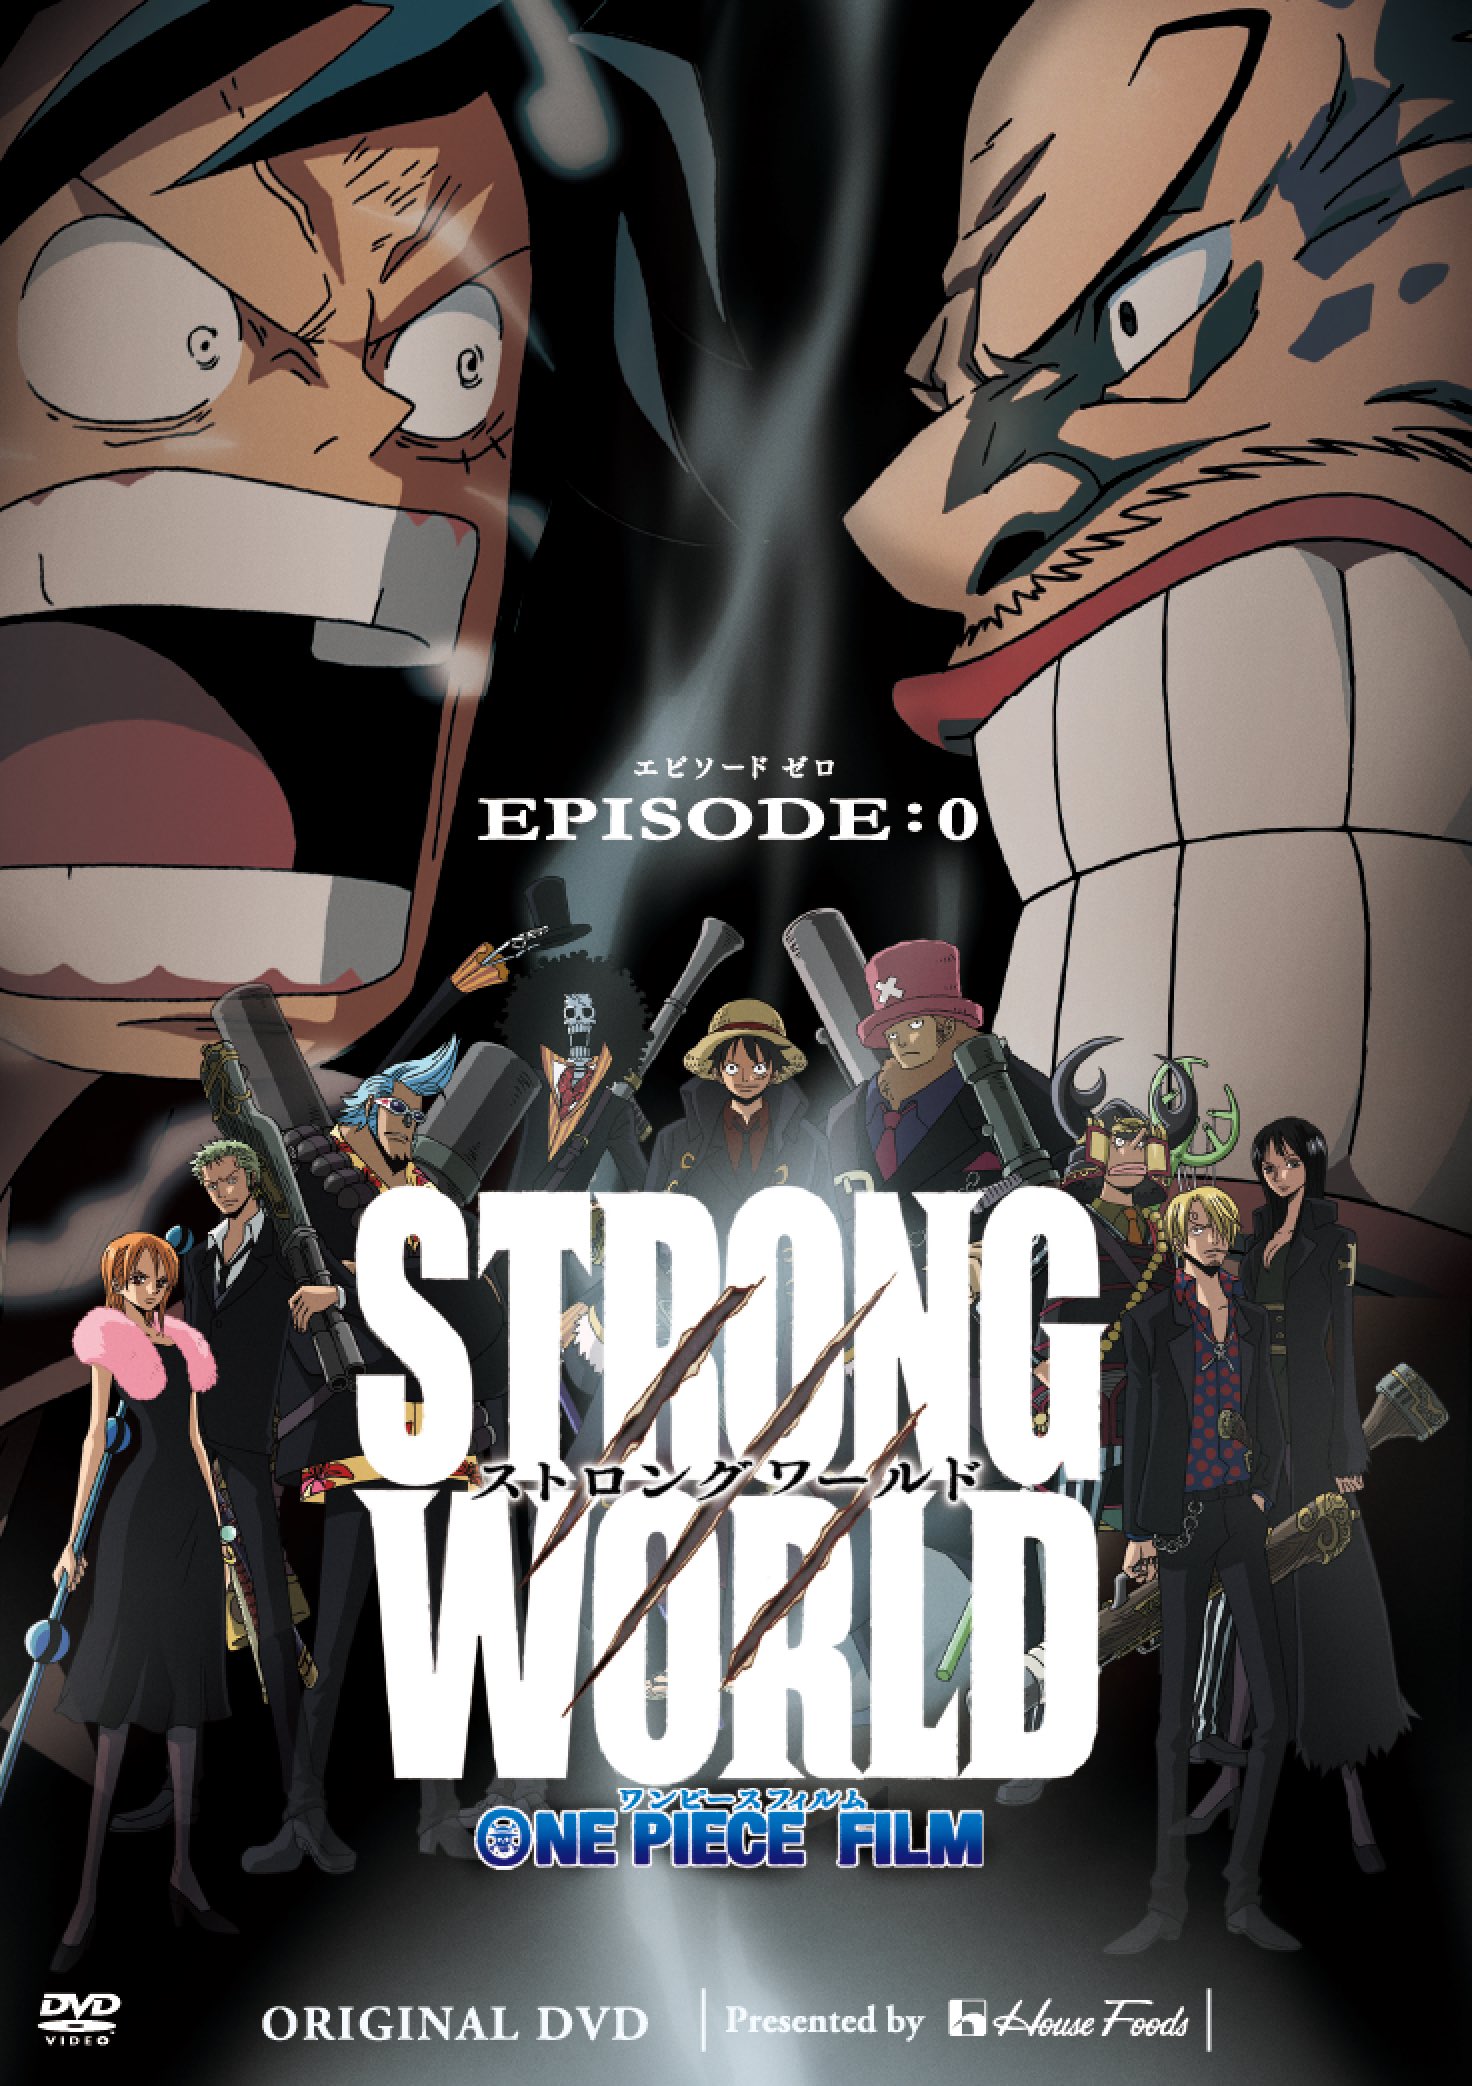 ONE PIECE FILM STRONG WORLD EPISODE:0」が本日10月13日20時より